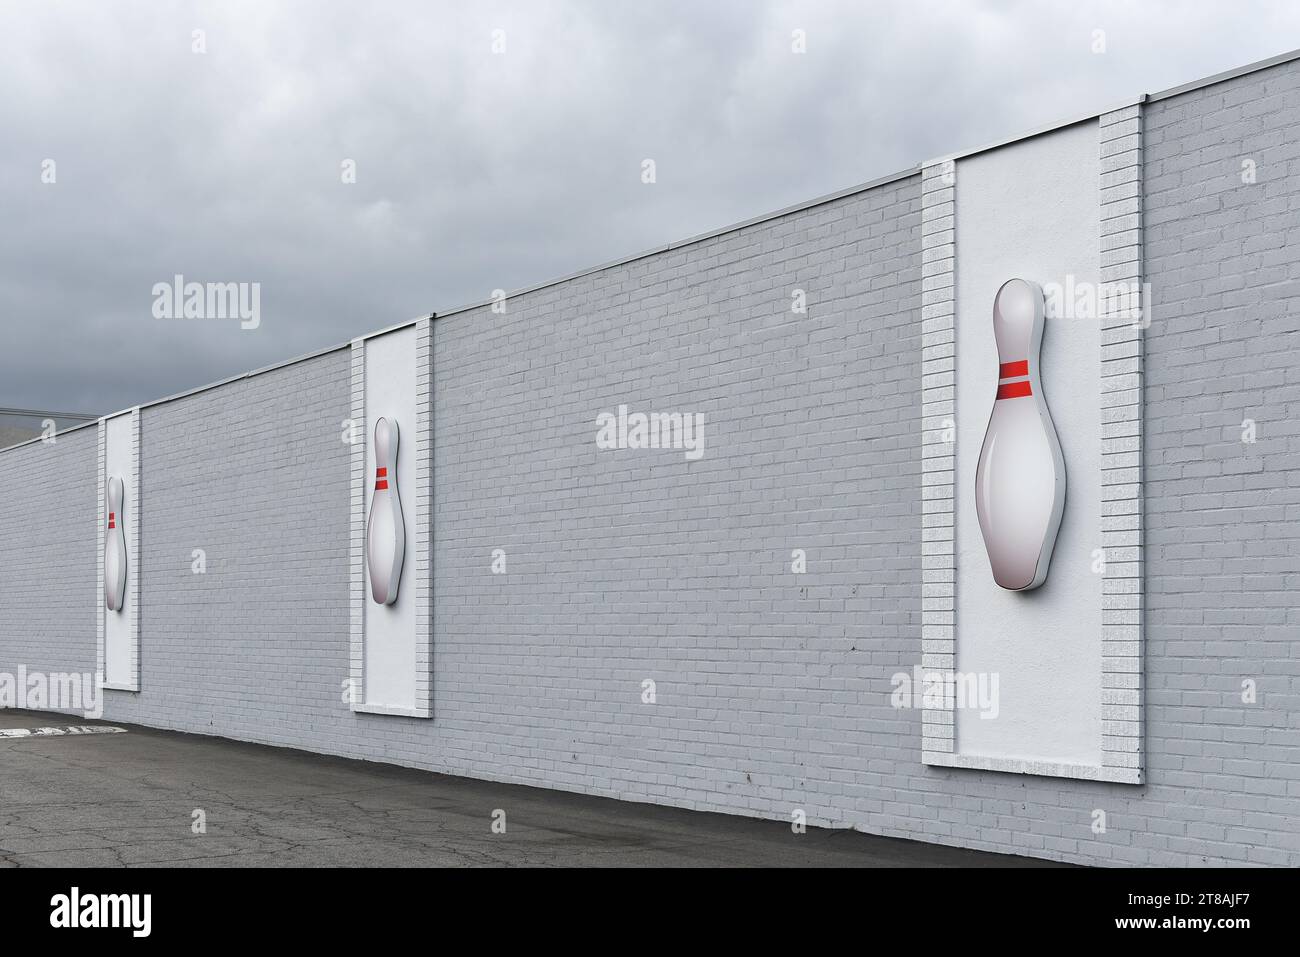 WESTMINSTER, CALIFORNIA - 25 OCT 2023: Bowling Pins on the side of the Westminster Lanes Bowling Alley building. Stock Photo